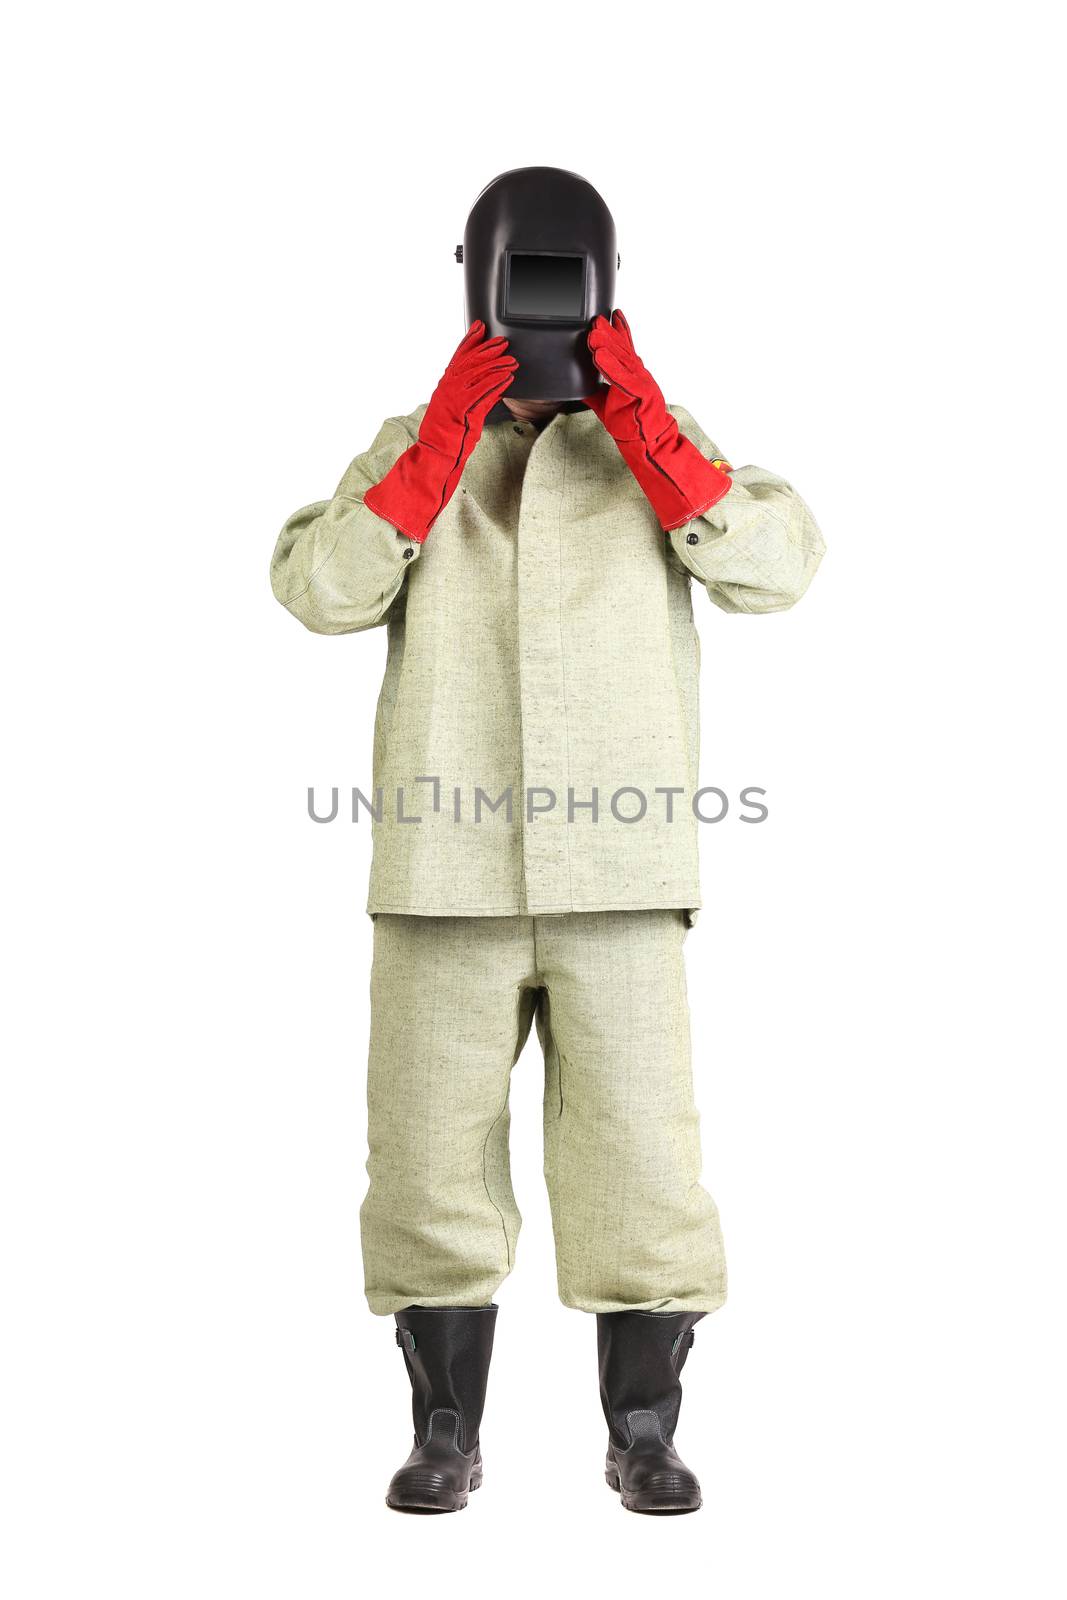 Welder holding mask. Isolated on a white background.